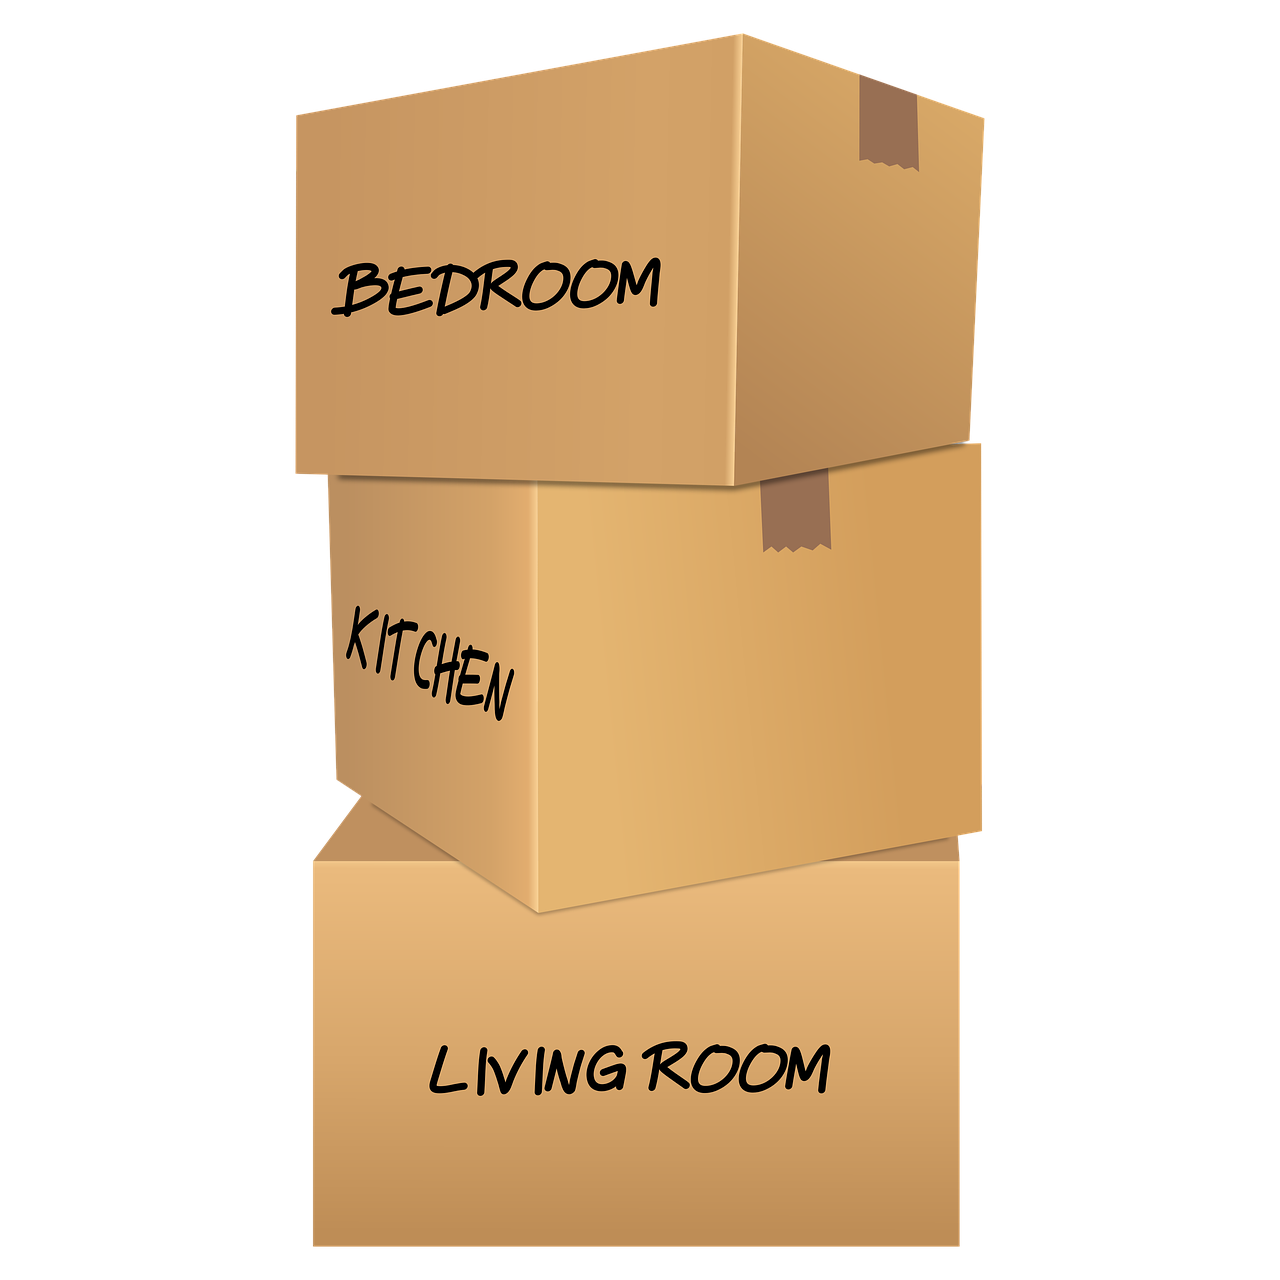 moving boxes, carton boxes, stack of moving boxes-4118678.jpg